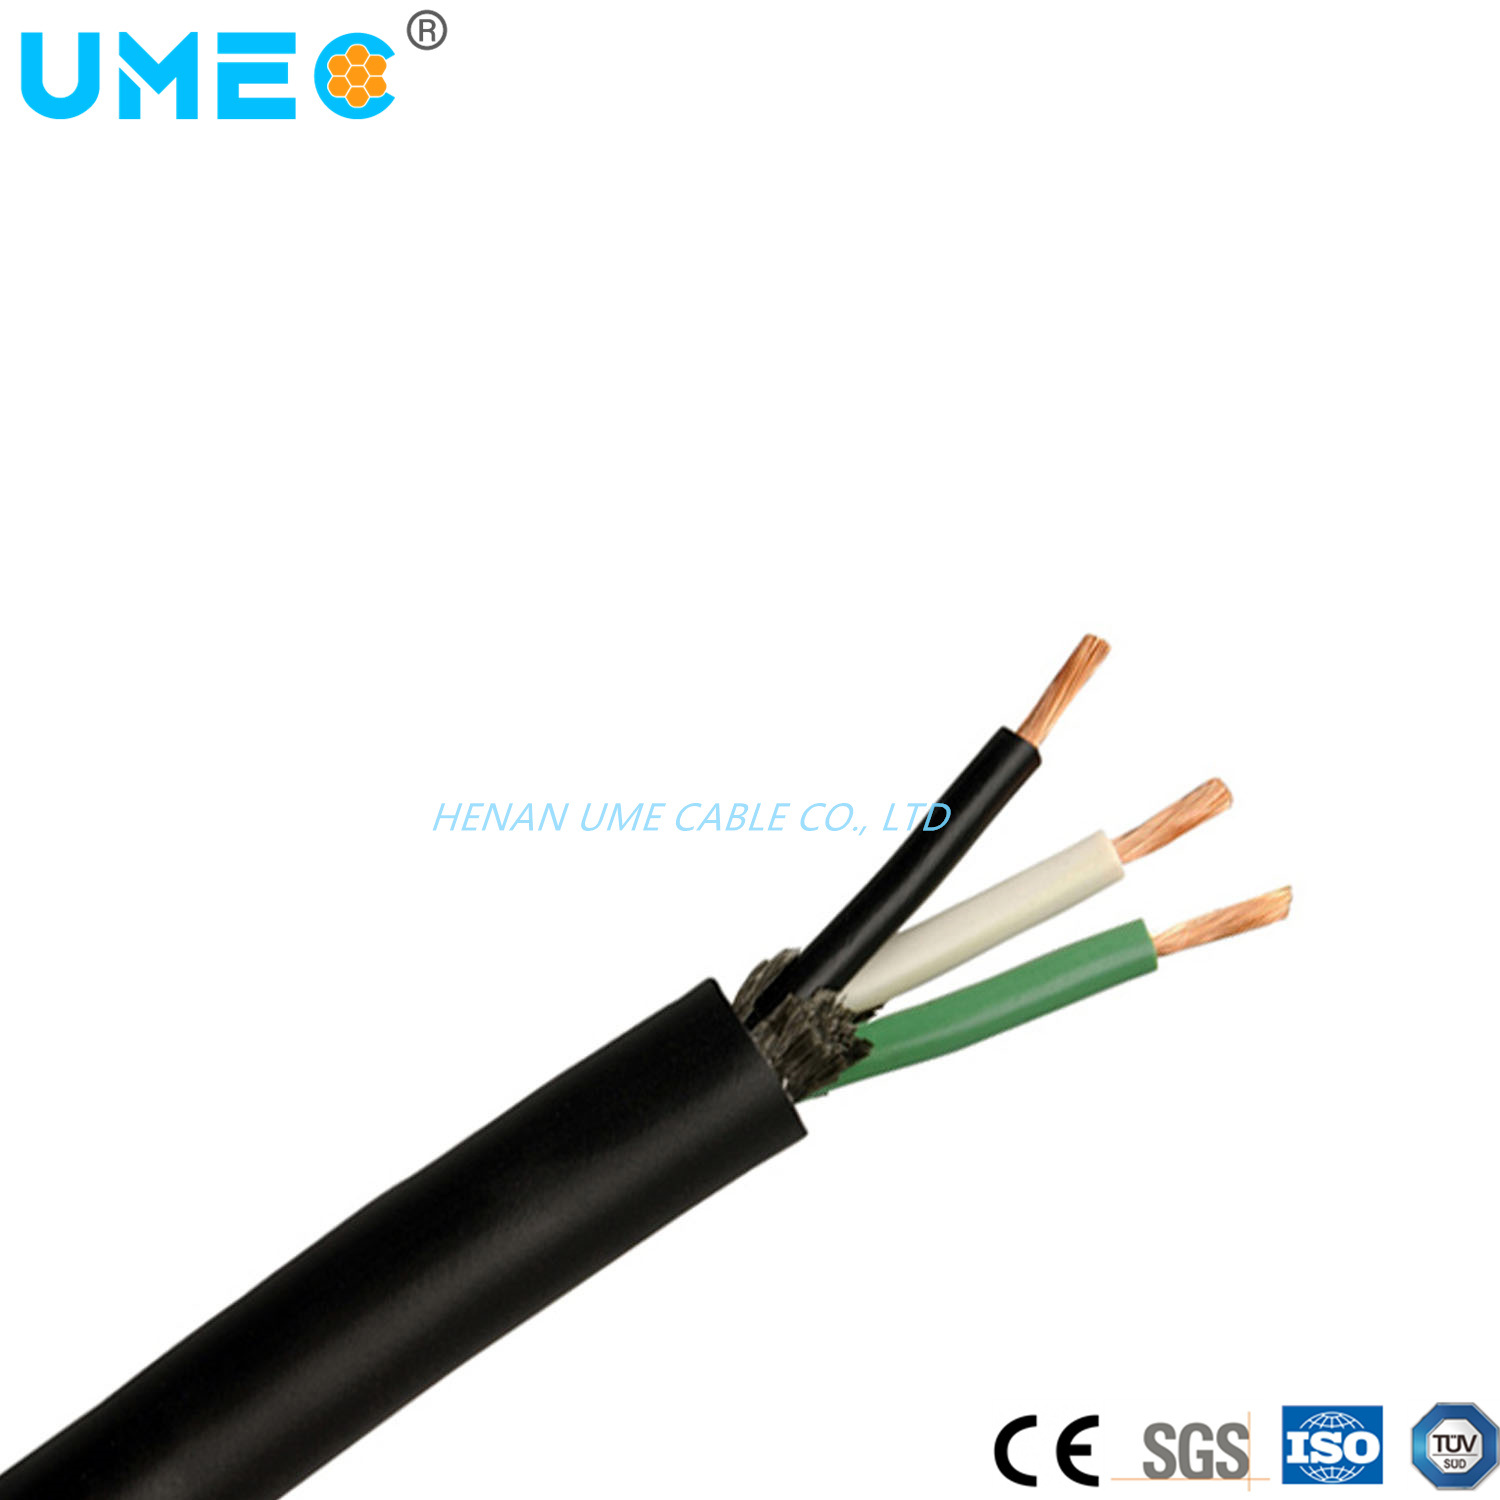 Wholesale Soow Sjow Sjoow Annealed Copper Tinned Copper Conductor EPDM Rubber Insulated CPE/Epr Jacket Cable Soow 18AWG 16AWG 10AWG 2AWG Bulk Price